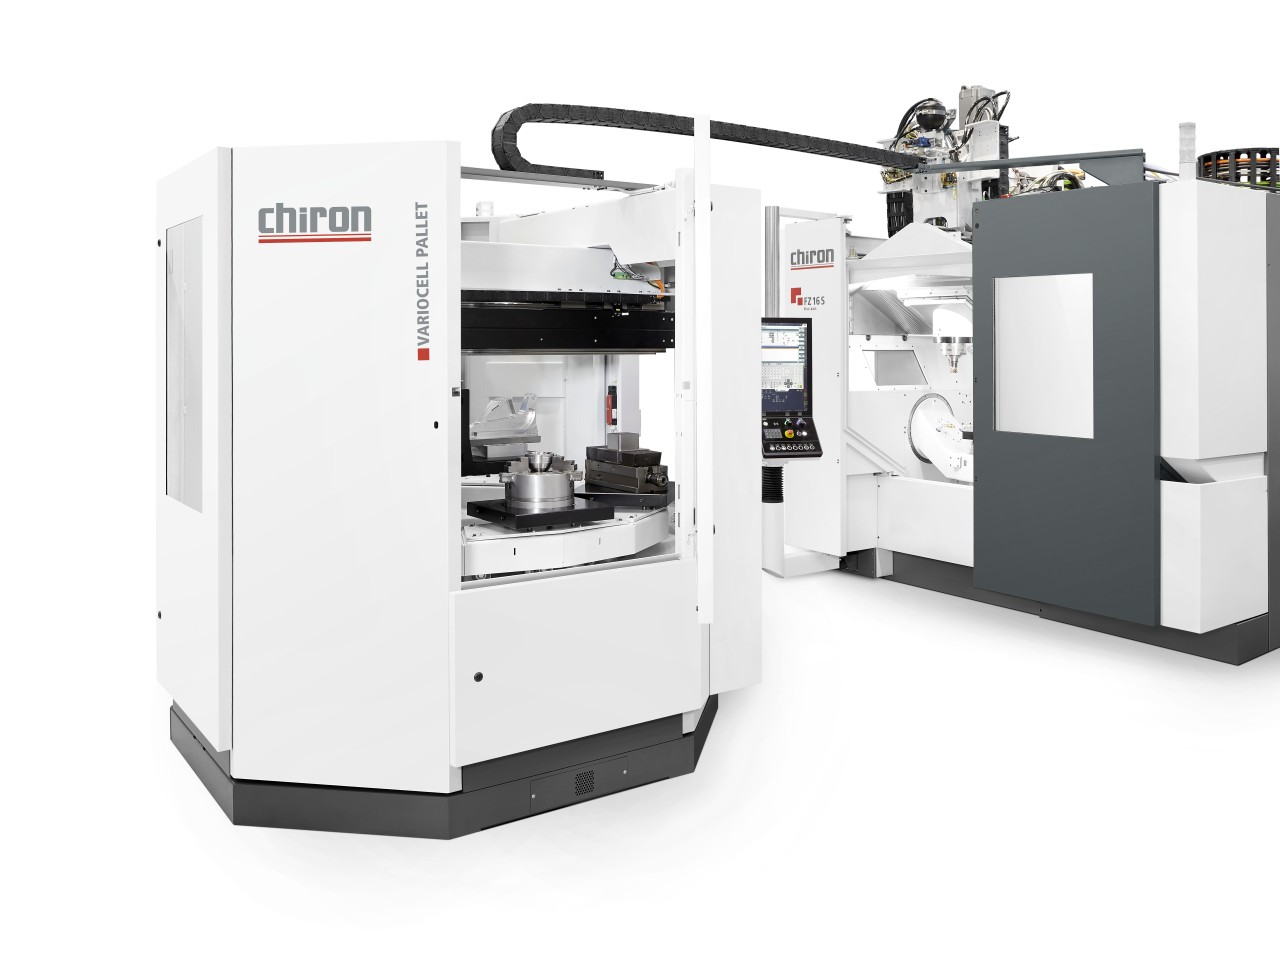  With its combination of the CHIRON FZ 16 S five axis and the VariocellPallet automation solution, small batch sizes and complex workpieces can be machined autonomously and with high flexibility.  